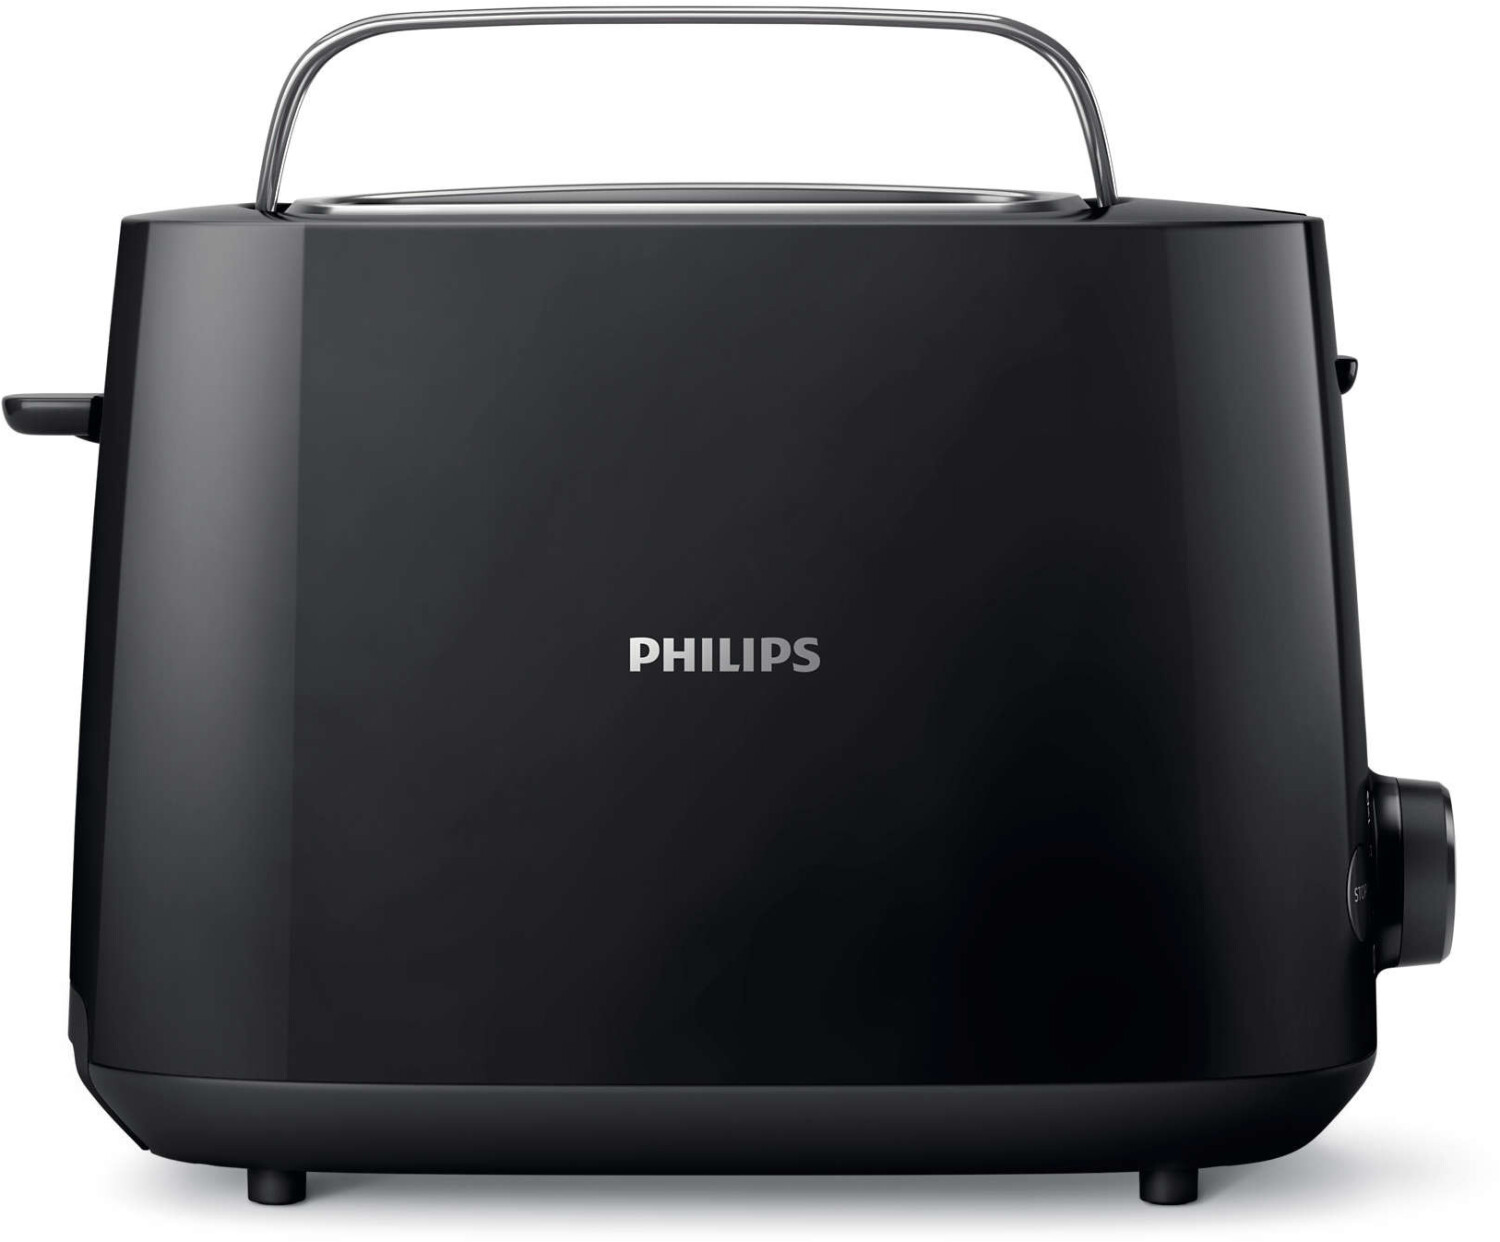 PHILIPS Grille-pains 2 Fentes 830w Blanc - Hd2581/00